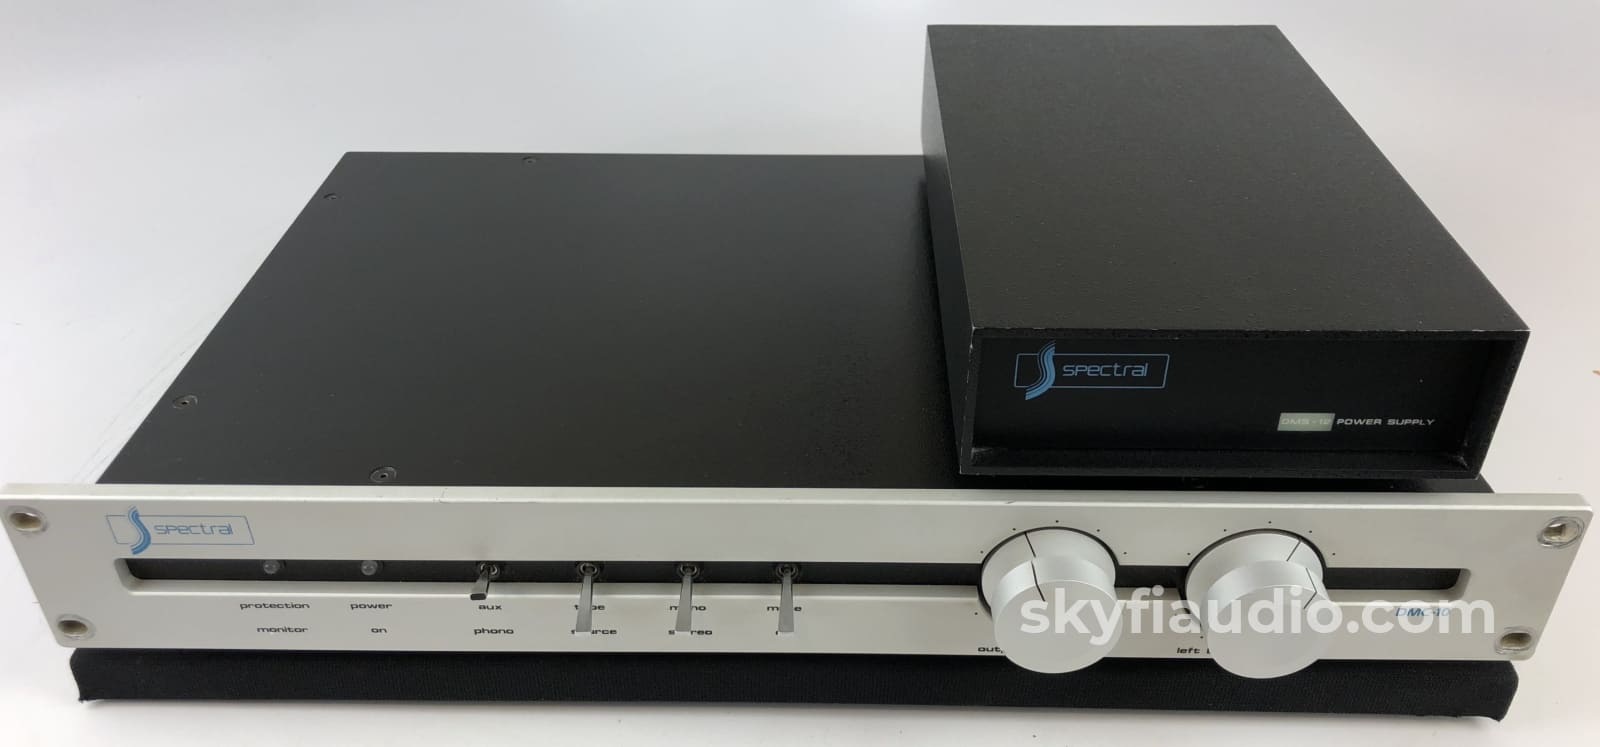 Spectral Dmc-10 Gamma Preamp With Phono Input Amplifier